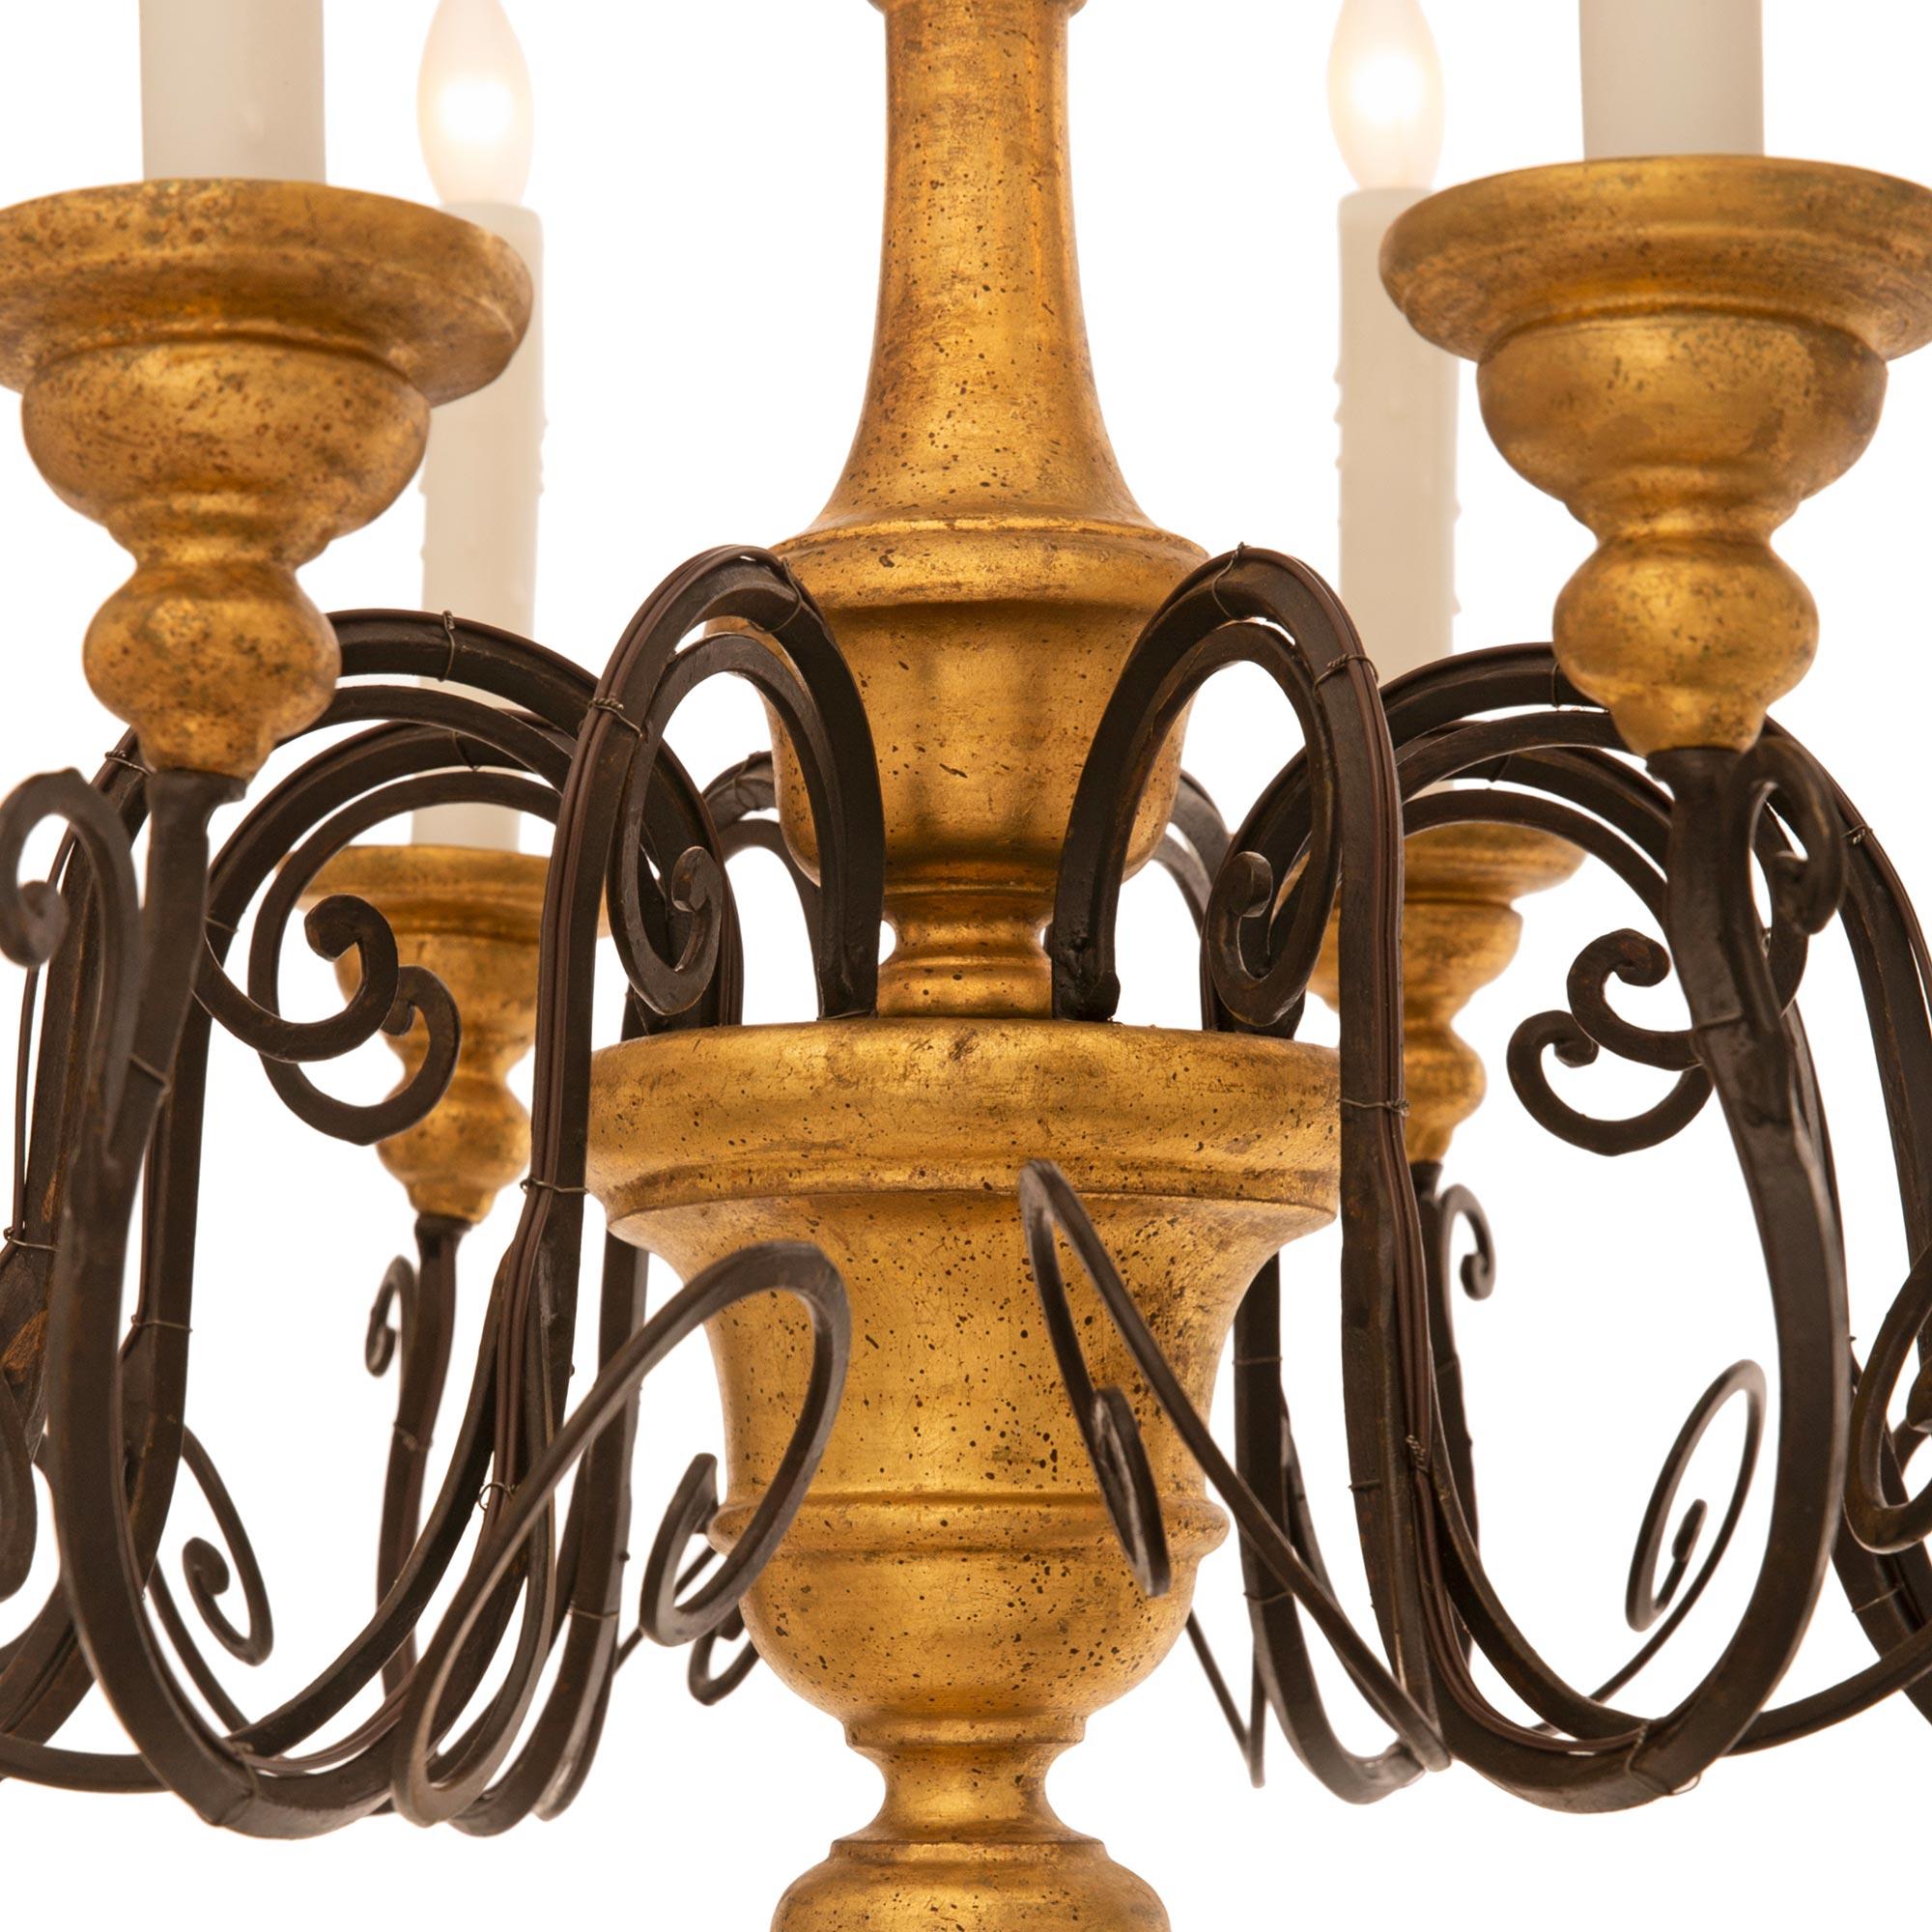 20th Century Pair Of Italian Turn Of The Century Wrought Iron And Giltwood Chandeliers For Sale